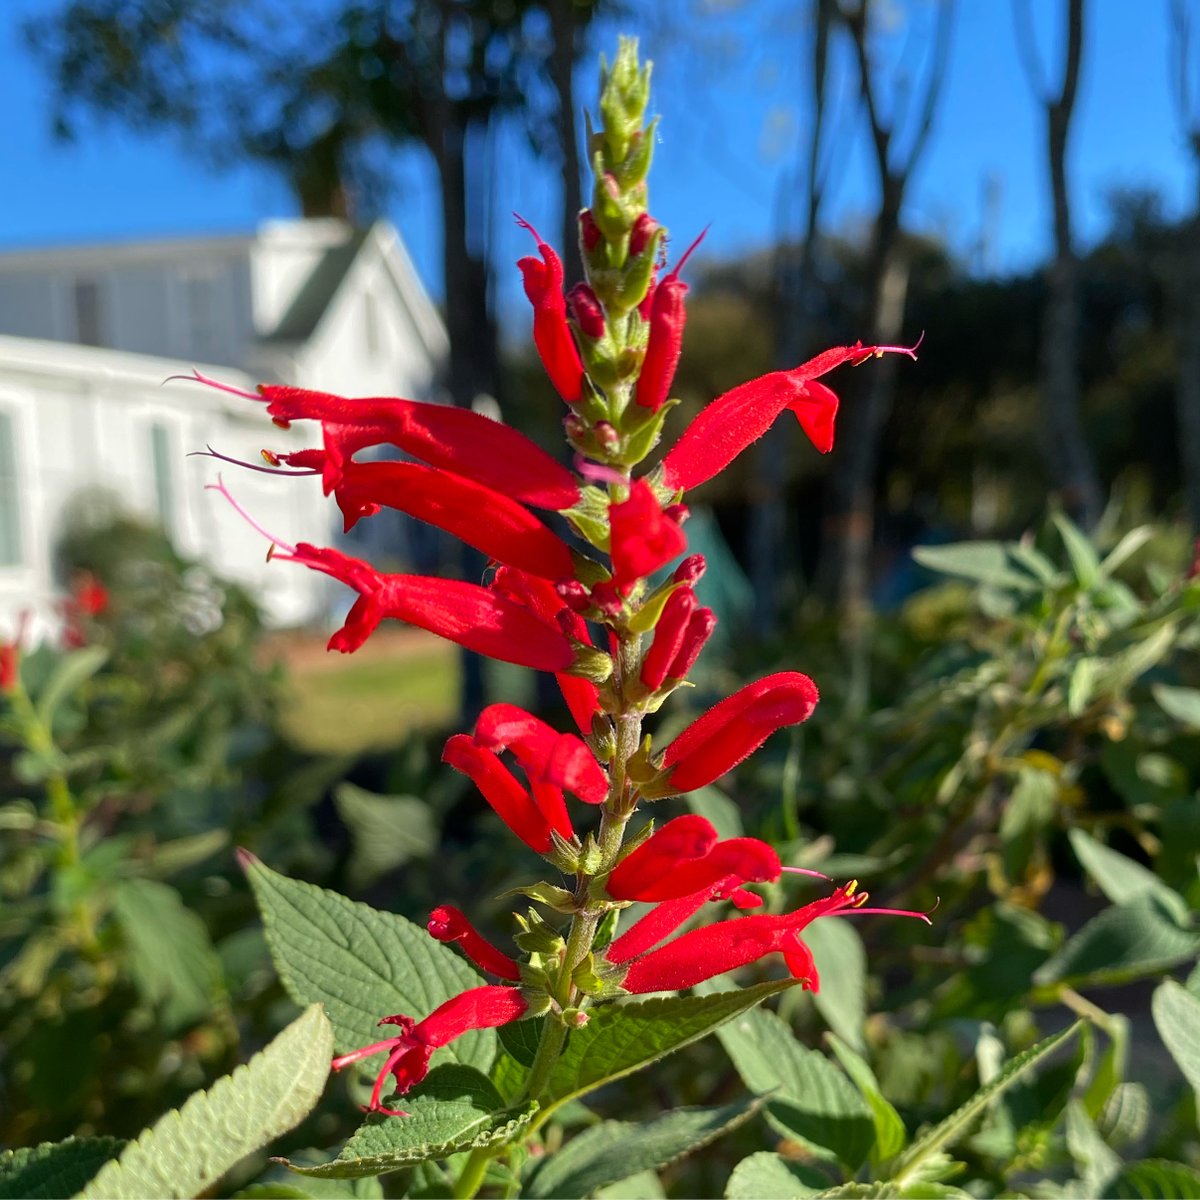 A bright, beautiful day with red salvia blooming at the Piedmont Physic Garden #salvia #gardening #GardenersWorld #UpstateSC #Flowers #redflowers